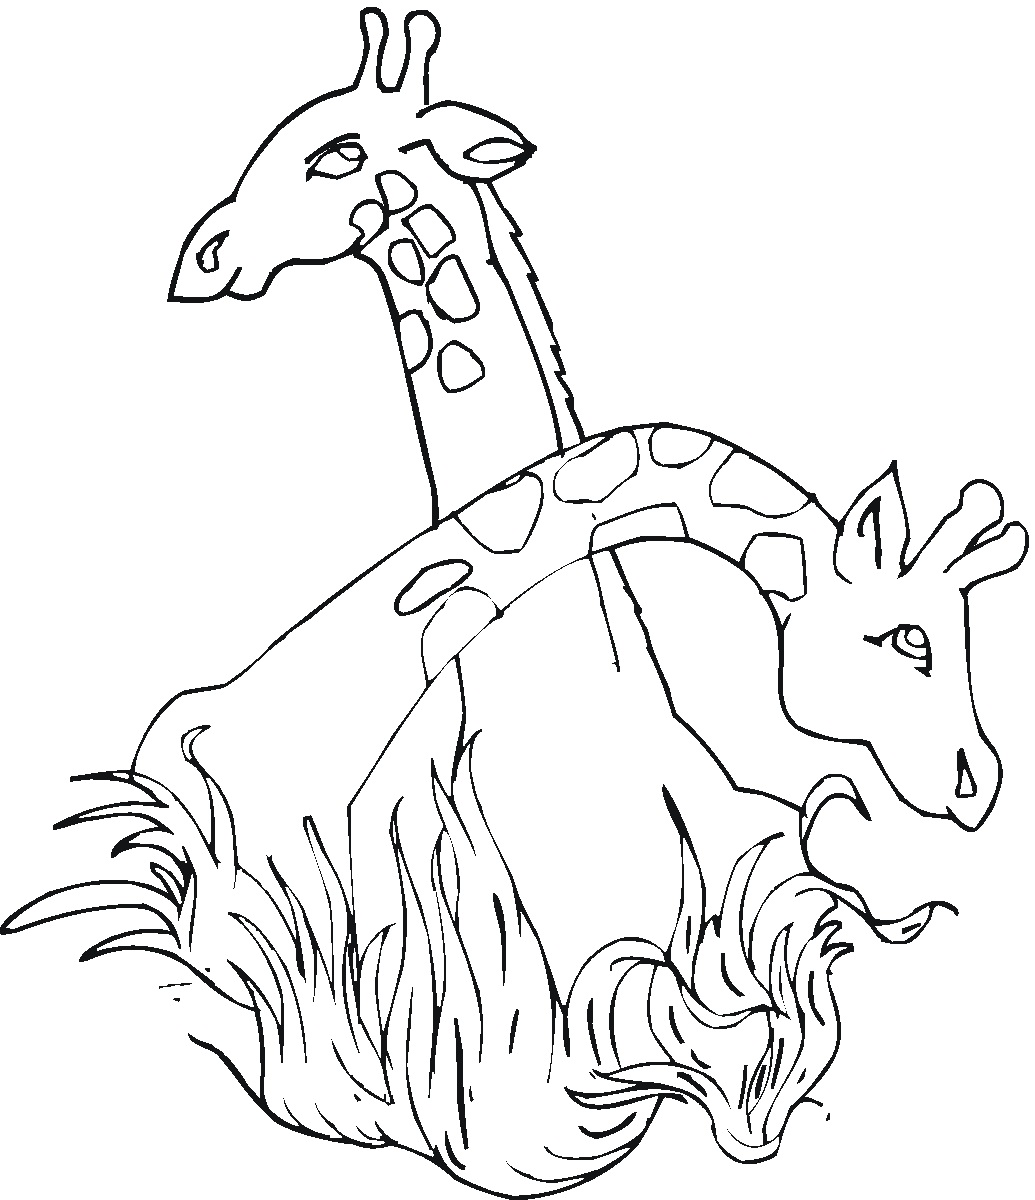 Coloring Page Giraffe Coloring Page